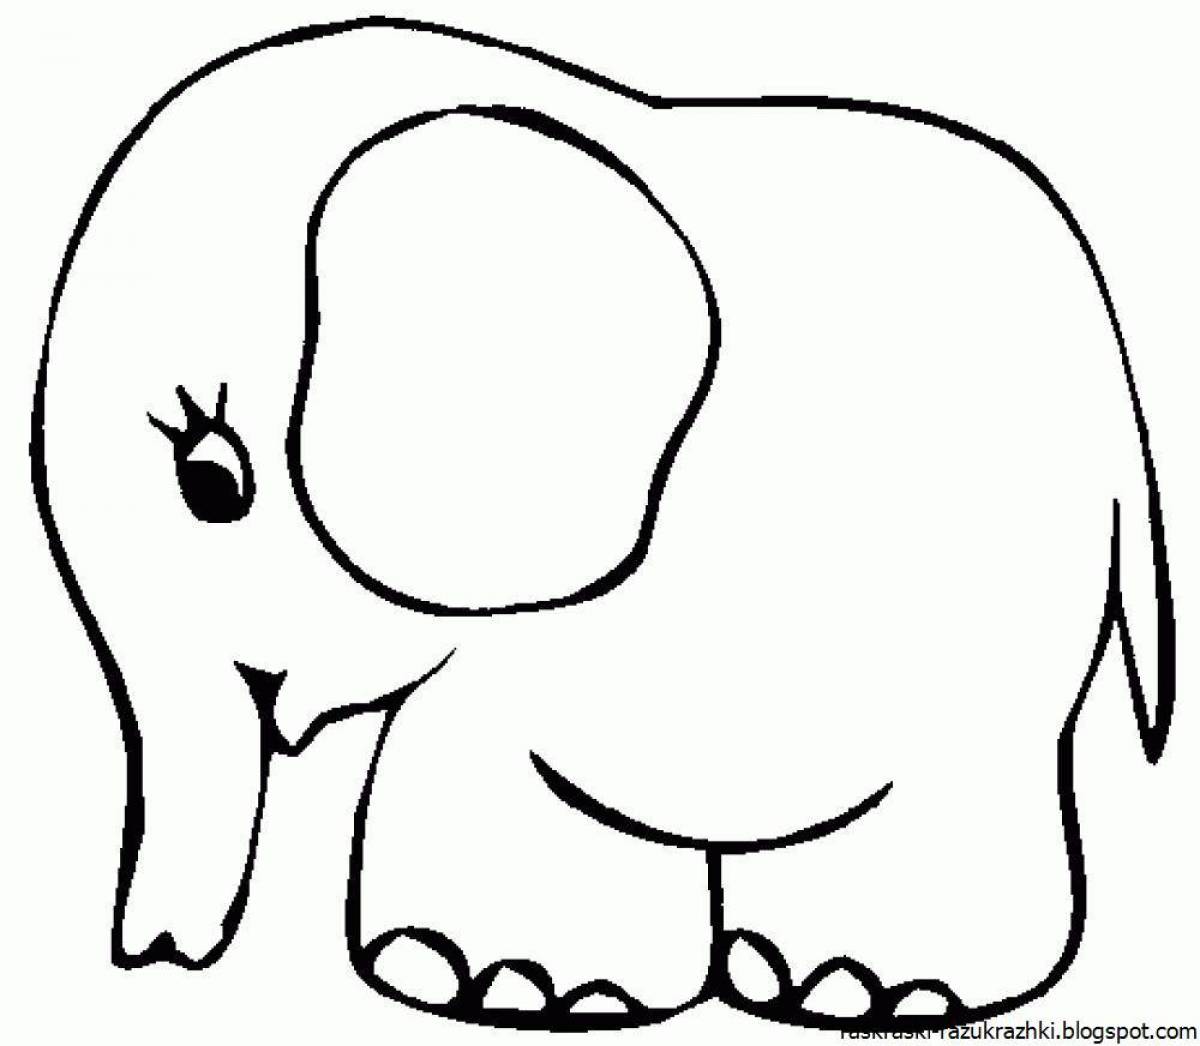 Outstanding elephant coloring book for kids